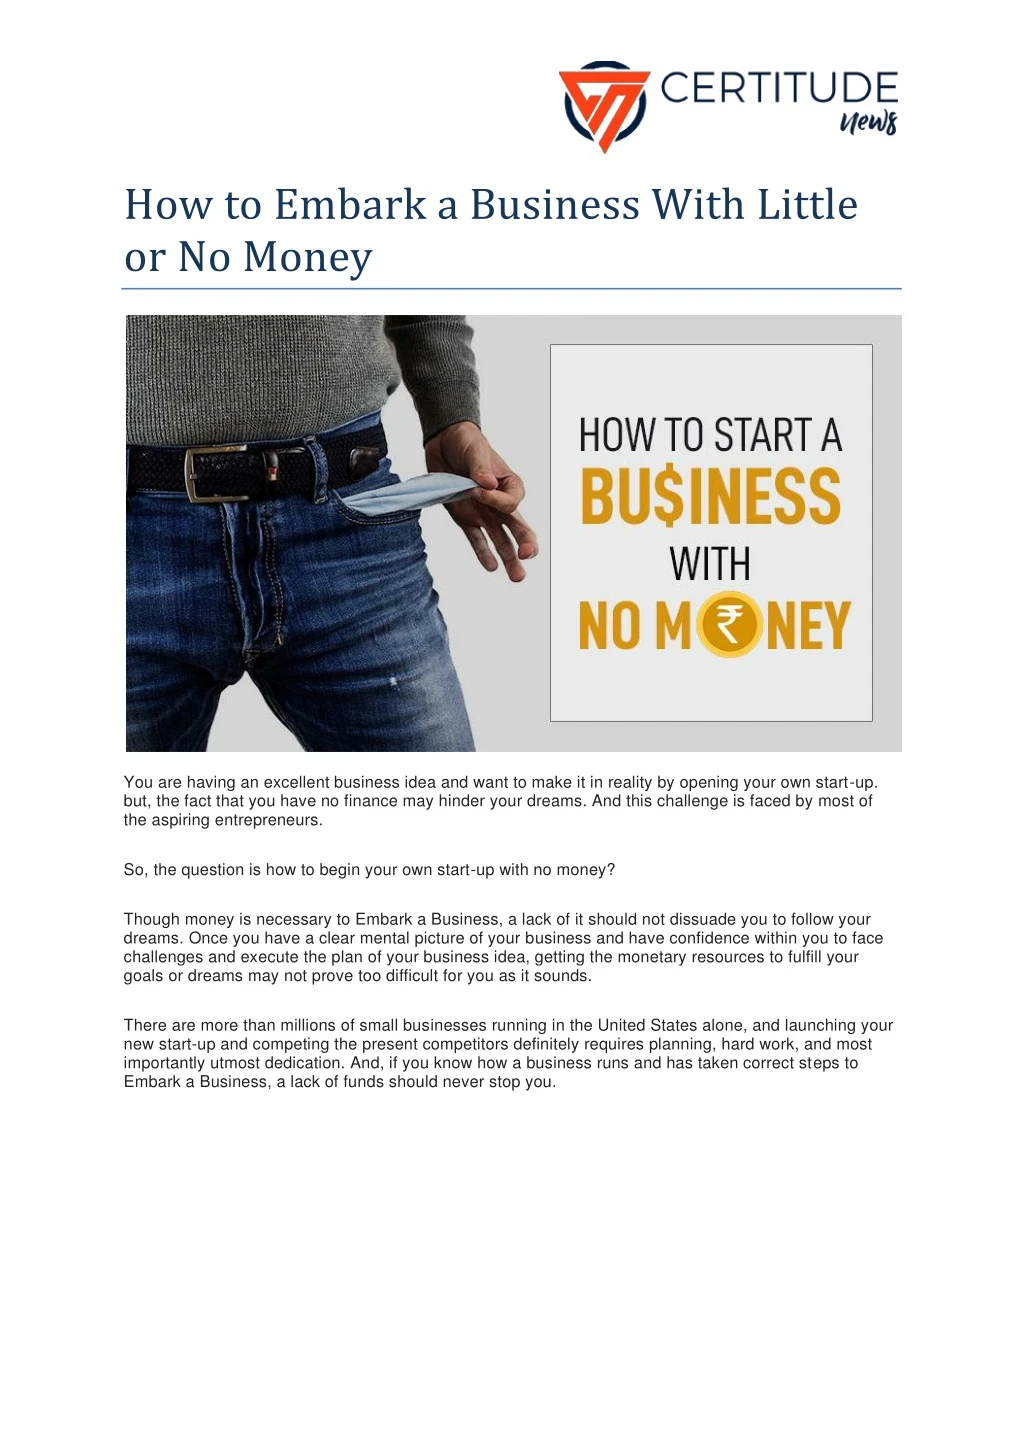 how to embark a business with little or no money